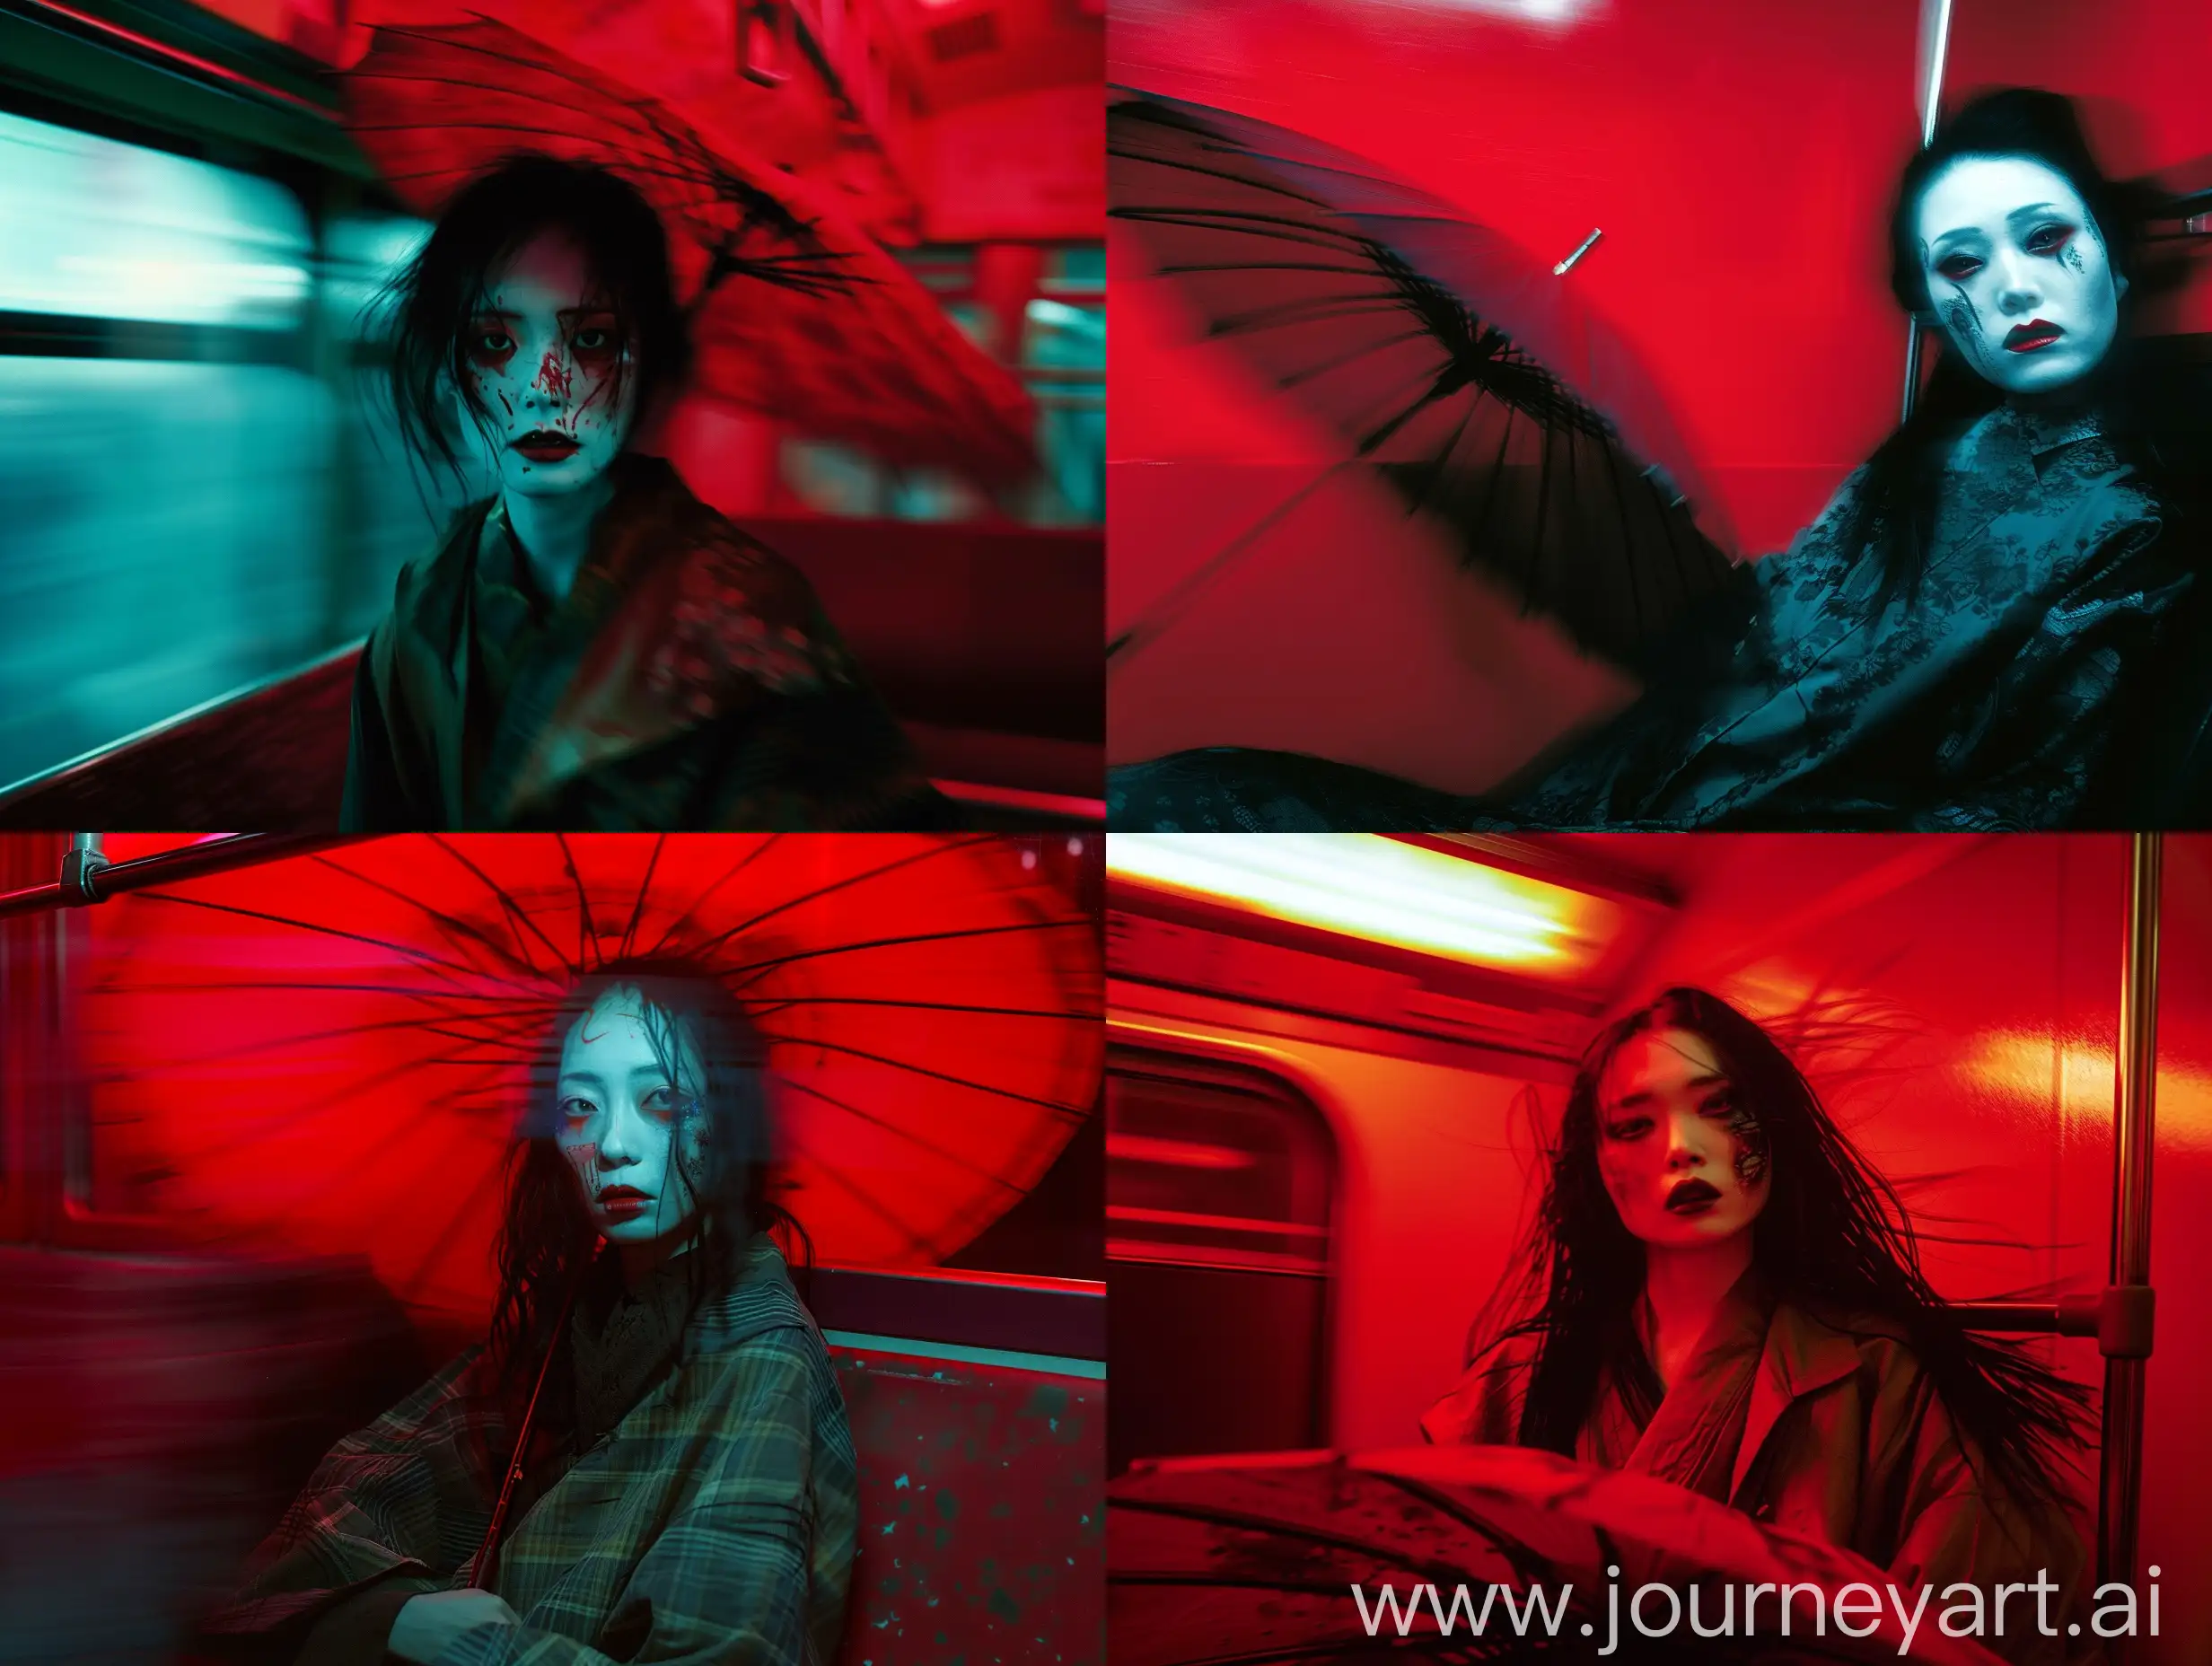 Portrait photo, cinematic, realism, Depiction of a yokai ((( blurred japanese female models figures are depicted against a red background. wounded make up, The motion blur creates a ghostly, ethereal effect, with clothing details obscured. One figure in the foreground appears to be wearing a oversized horror high fashion blackout, The lighting and blur lend a mysterious, almost haunting quality to the scene, nocturnal fashion ))) Japanese 1970, Sitting in the subway car with an umbrella, late at night, empty and deep, wither, die, unsettling, horror movie
